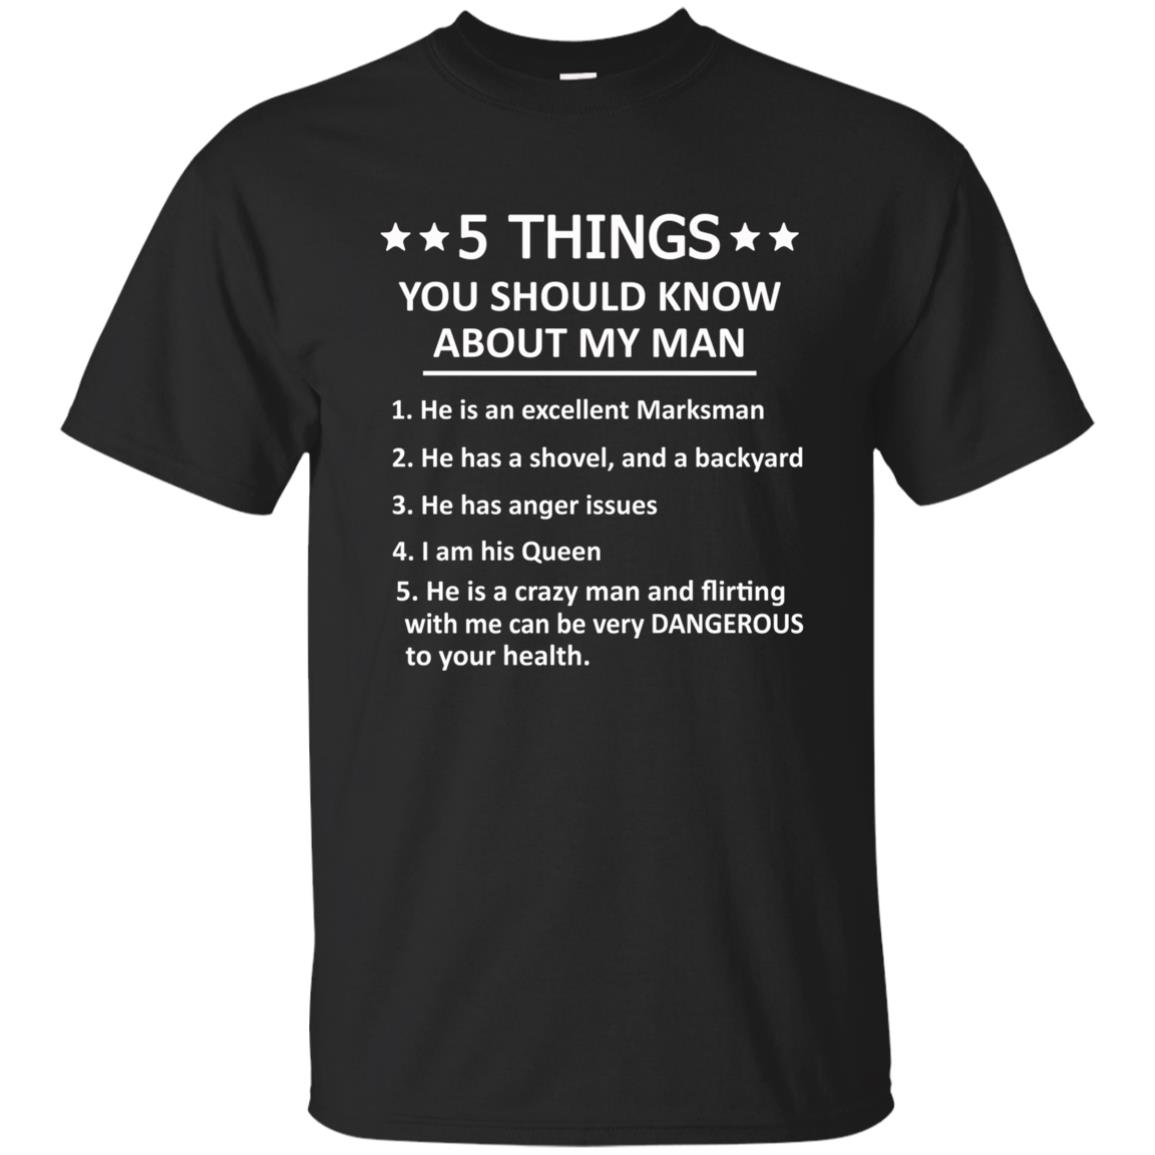 5 Things you should know about my man t-shirt, hoodies, tank top